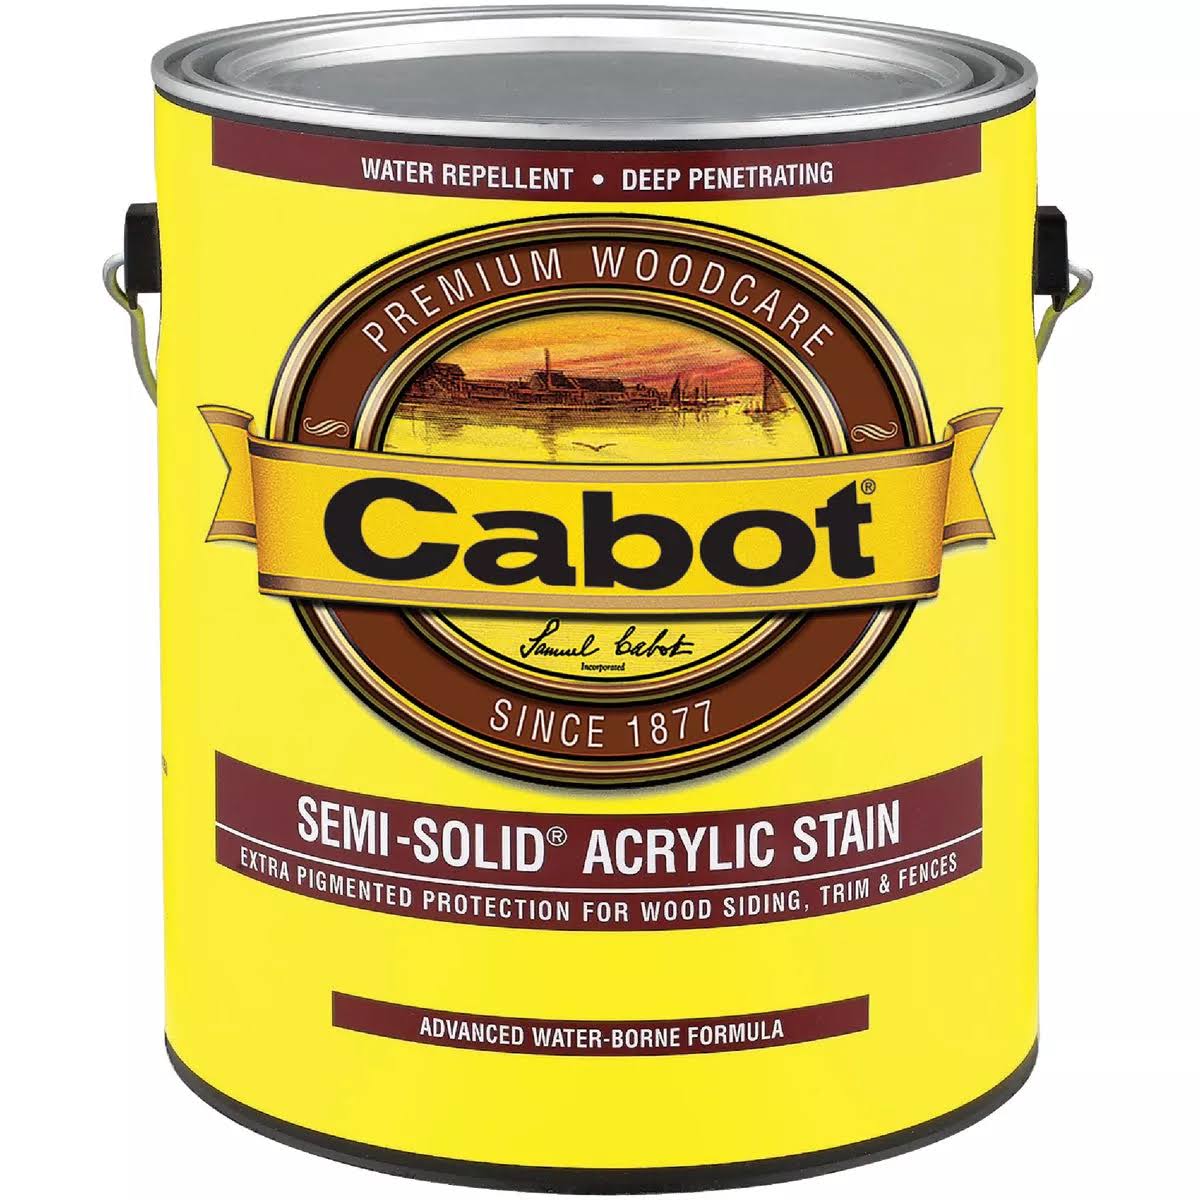 Cabot Semi-Solid Water Based Stain - 1g, 1106 Neutral Base